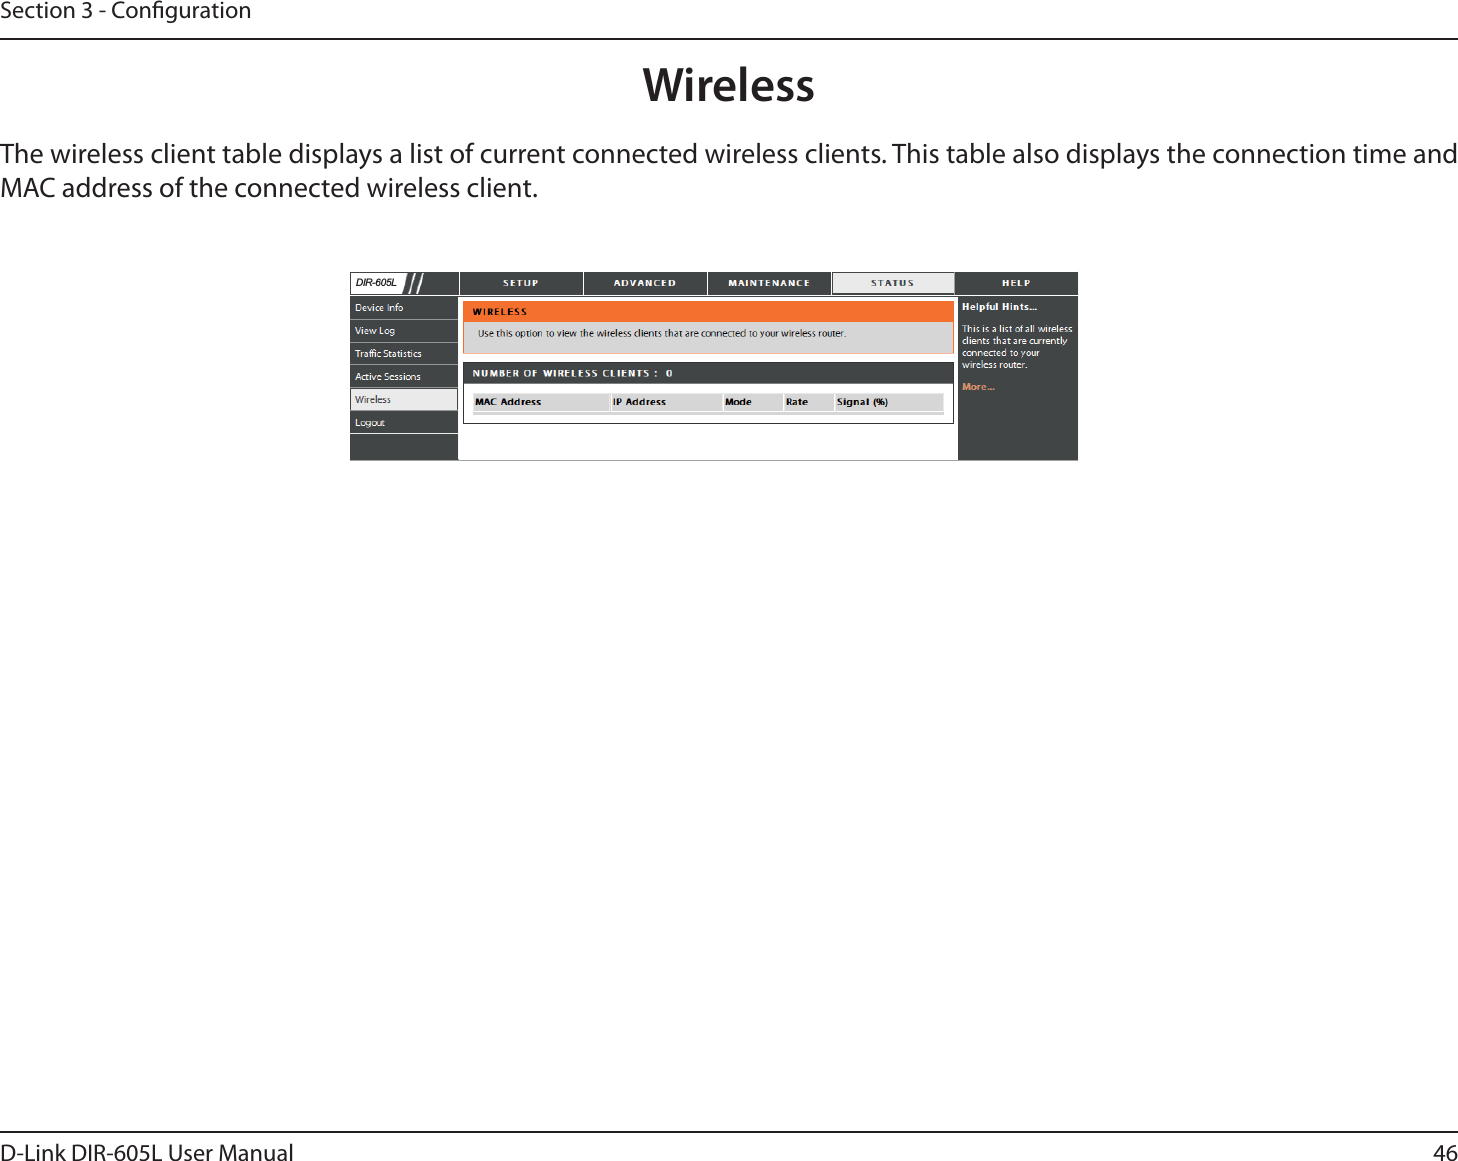 46D-Link DIR-605L User ManualSection 3 - CongurationWirelessThe wireless client table displays a list of current connected wireless clients. This table also displays the connection time and MAC address of the connected wireless client.&apos;,5/